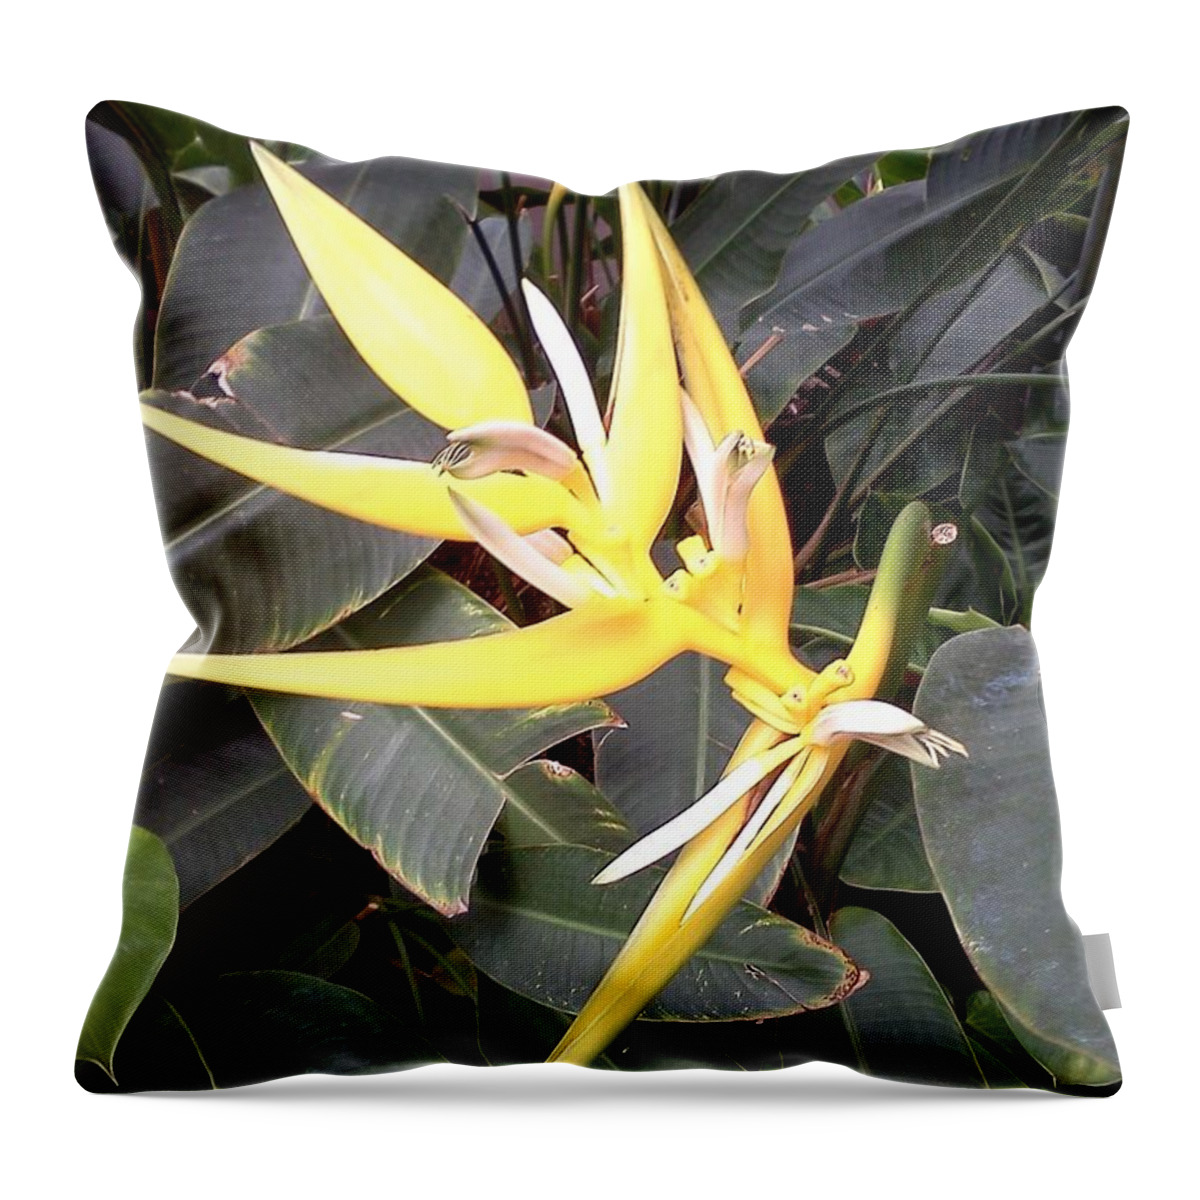 Yellow Throw Pillow featuring the photograph Tiny Dancer by Pamela Henry